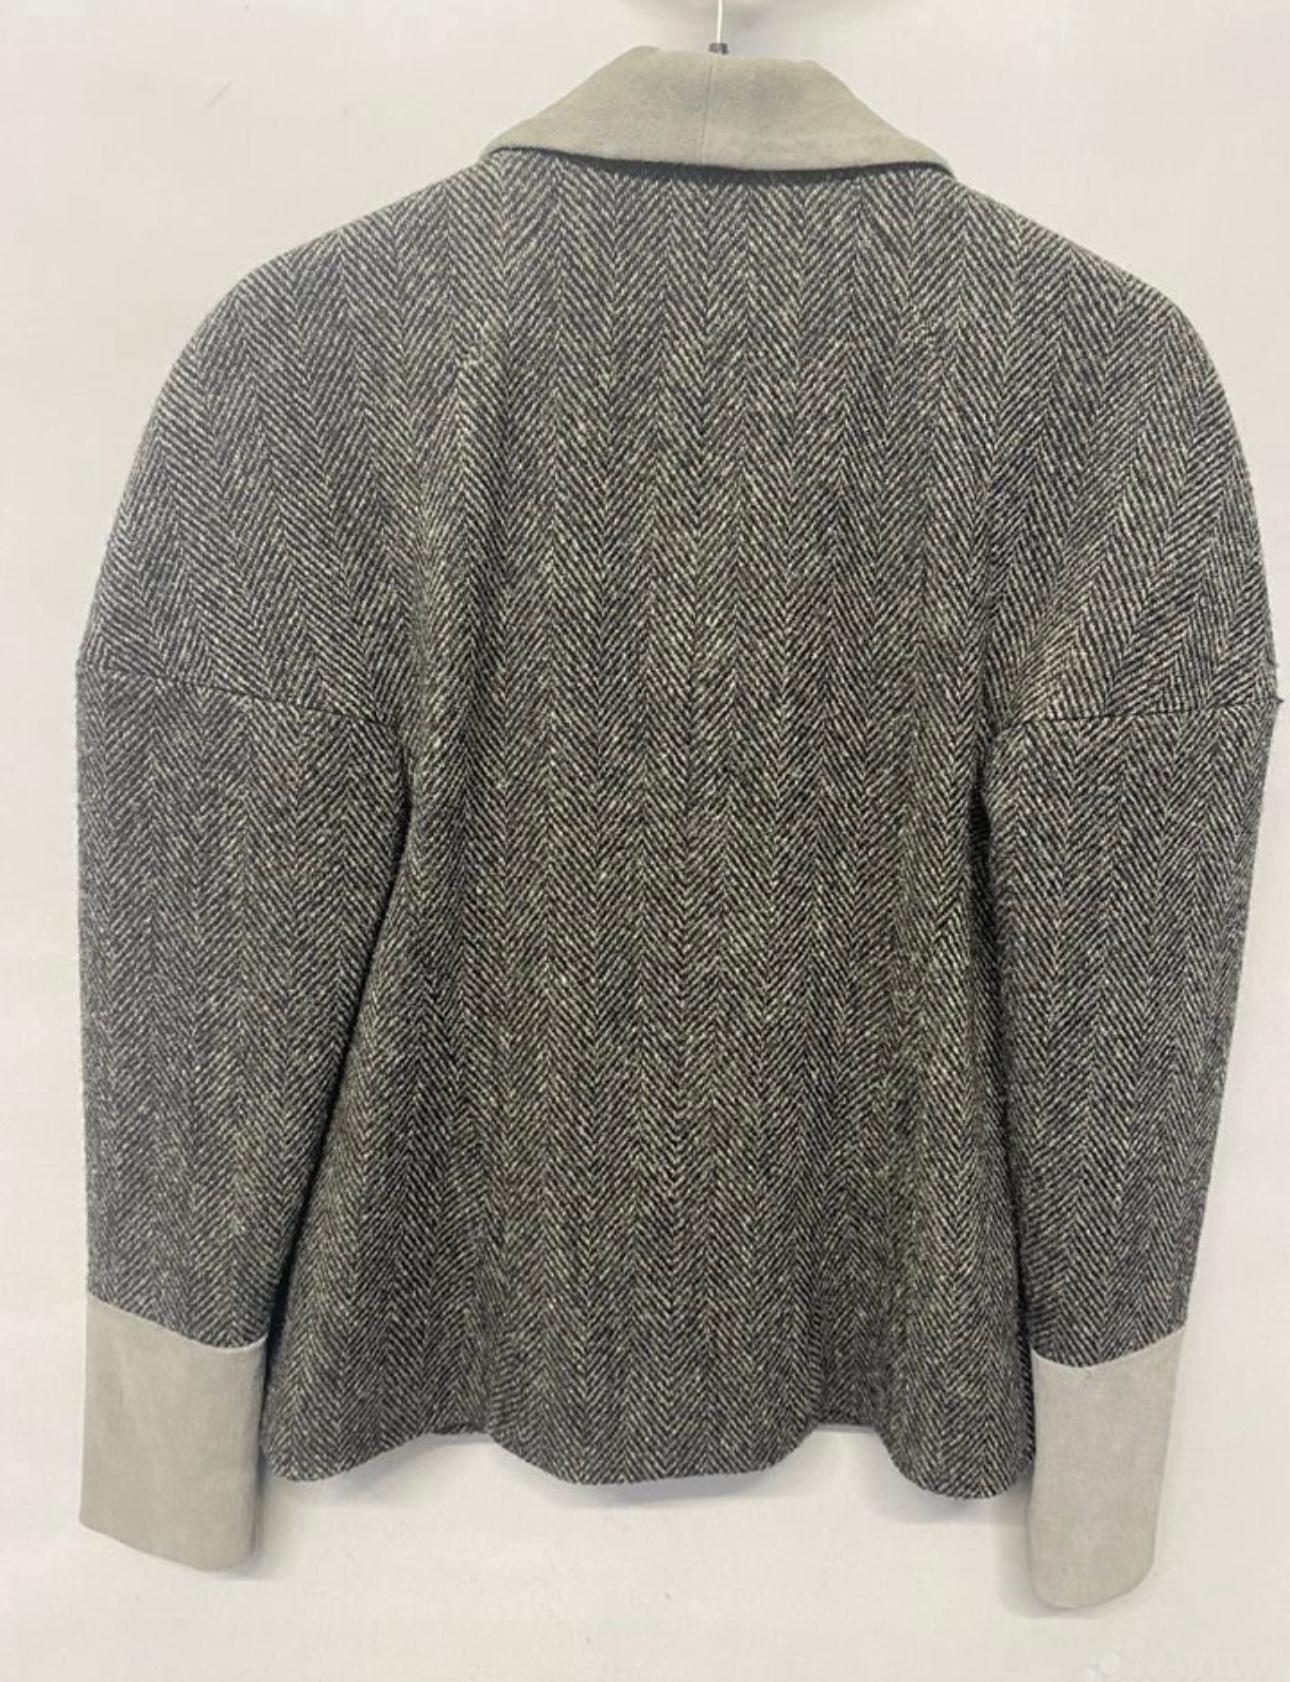 Women's or Men's Chanel CC Buttons Grey Tweed Jacket with Suede Accents For Sale